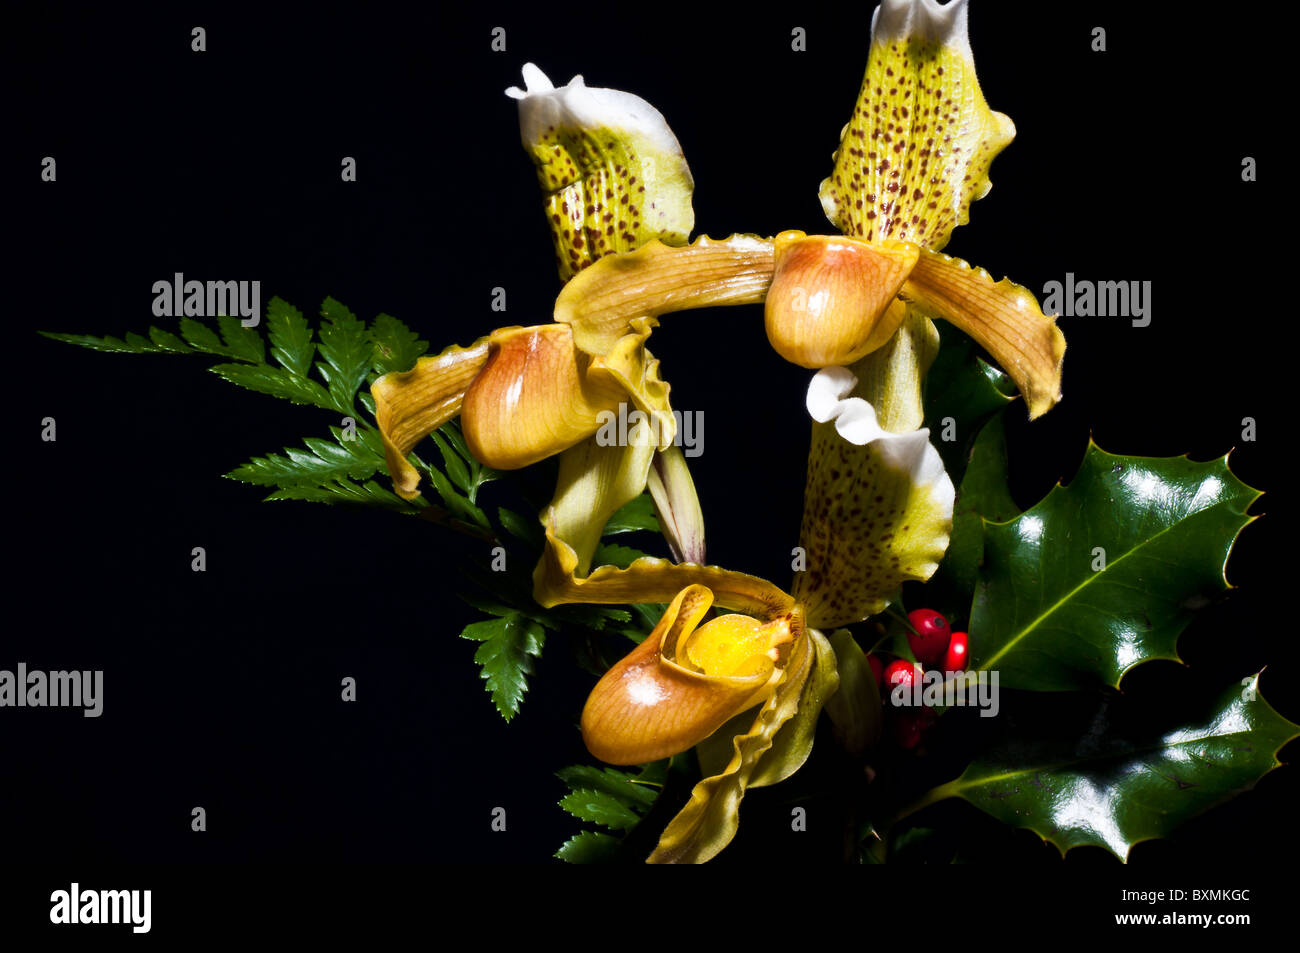 Three orchids  paphiopedilum (flower exotic) portraits still-life horizontally on a black background between ferns and mistletoe Stock Photo